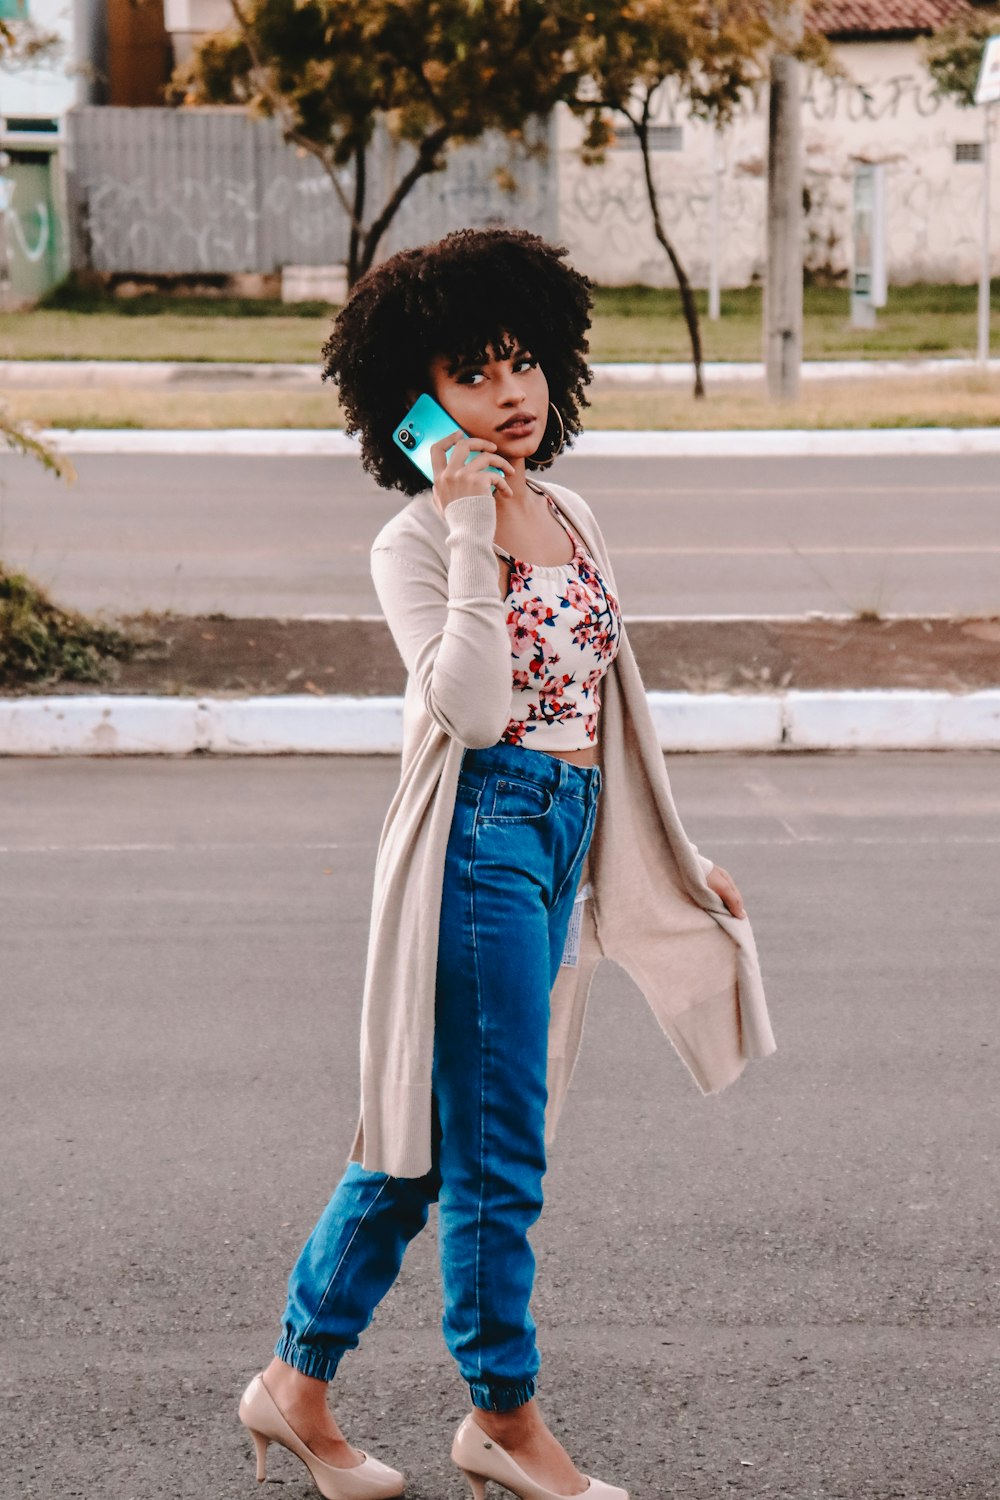 woman in white and red floral long sleeve shirt and blue denim jeans standing on sidewalk